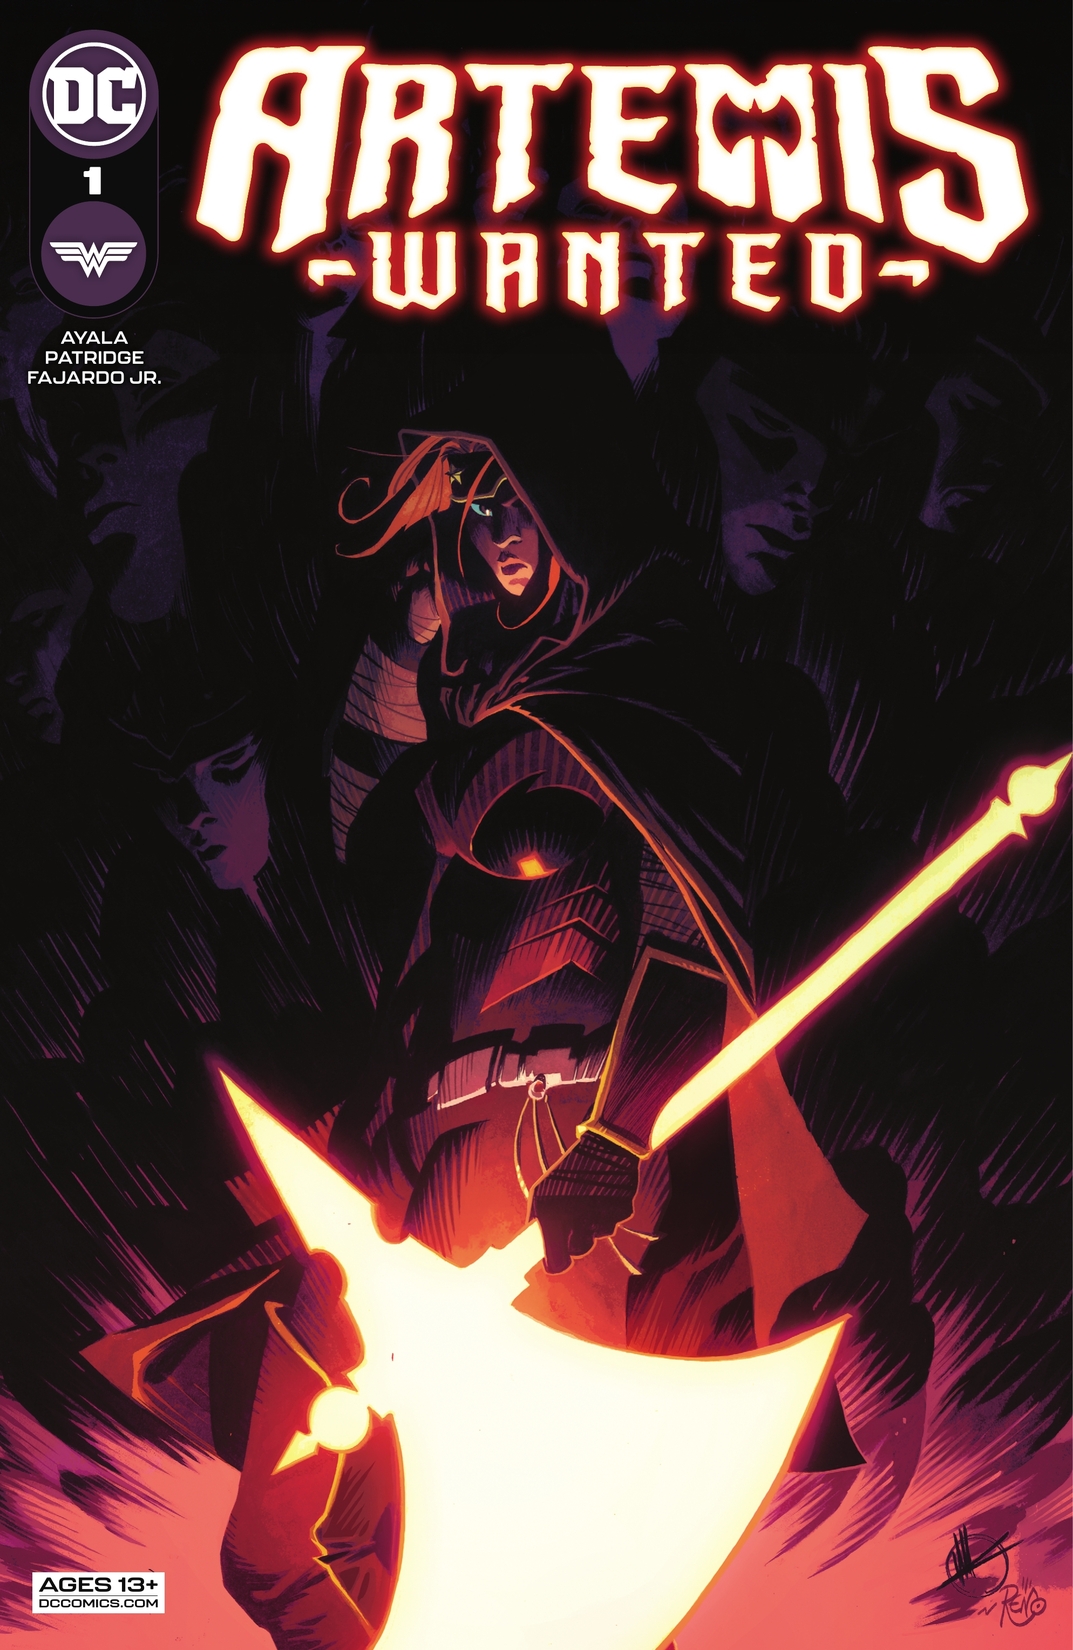 Artemis: Wanted #1 preview images